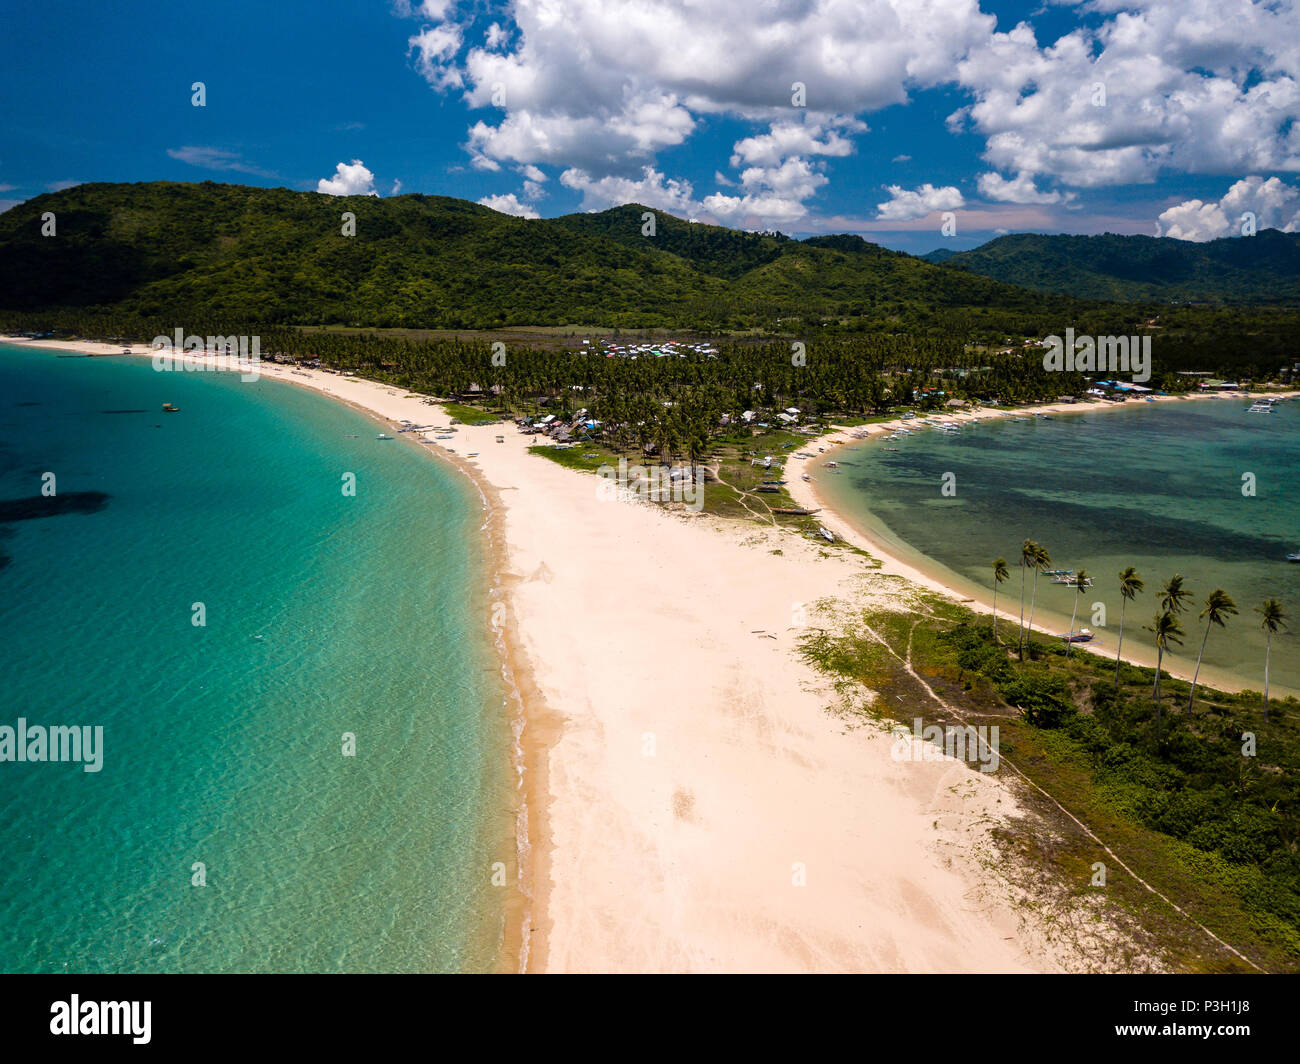 Drone view of twin tropical sandy beaches Stock Photo